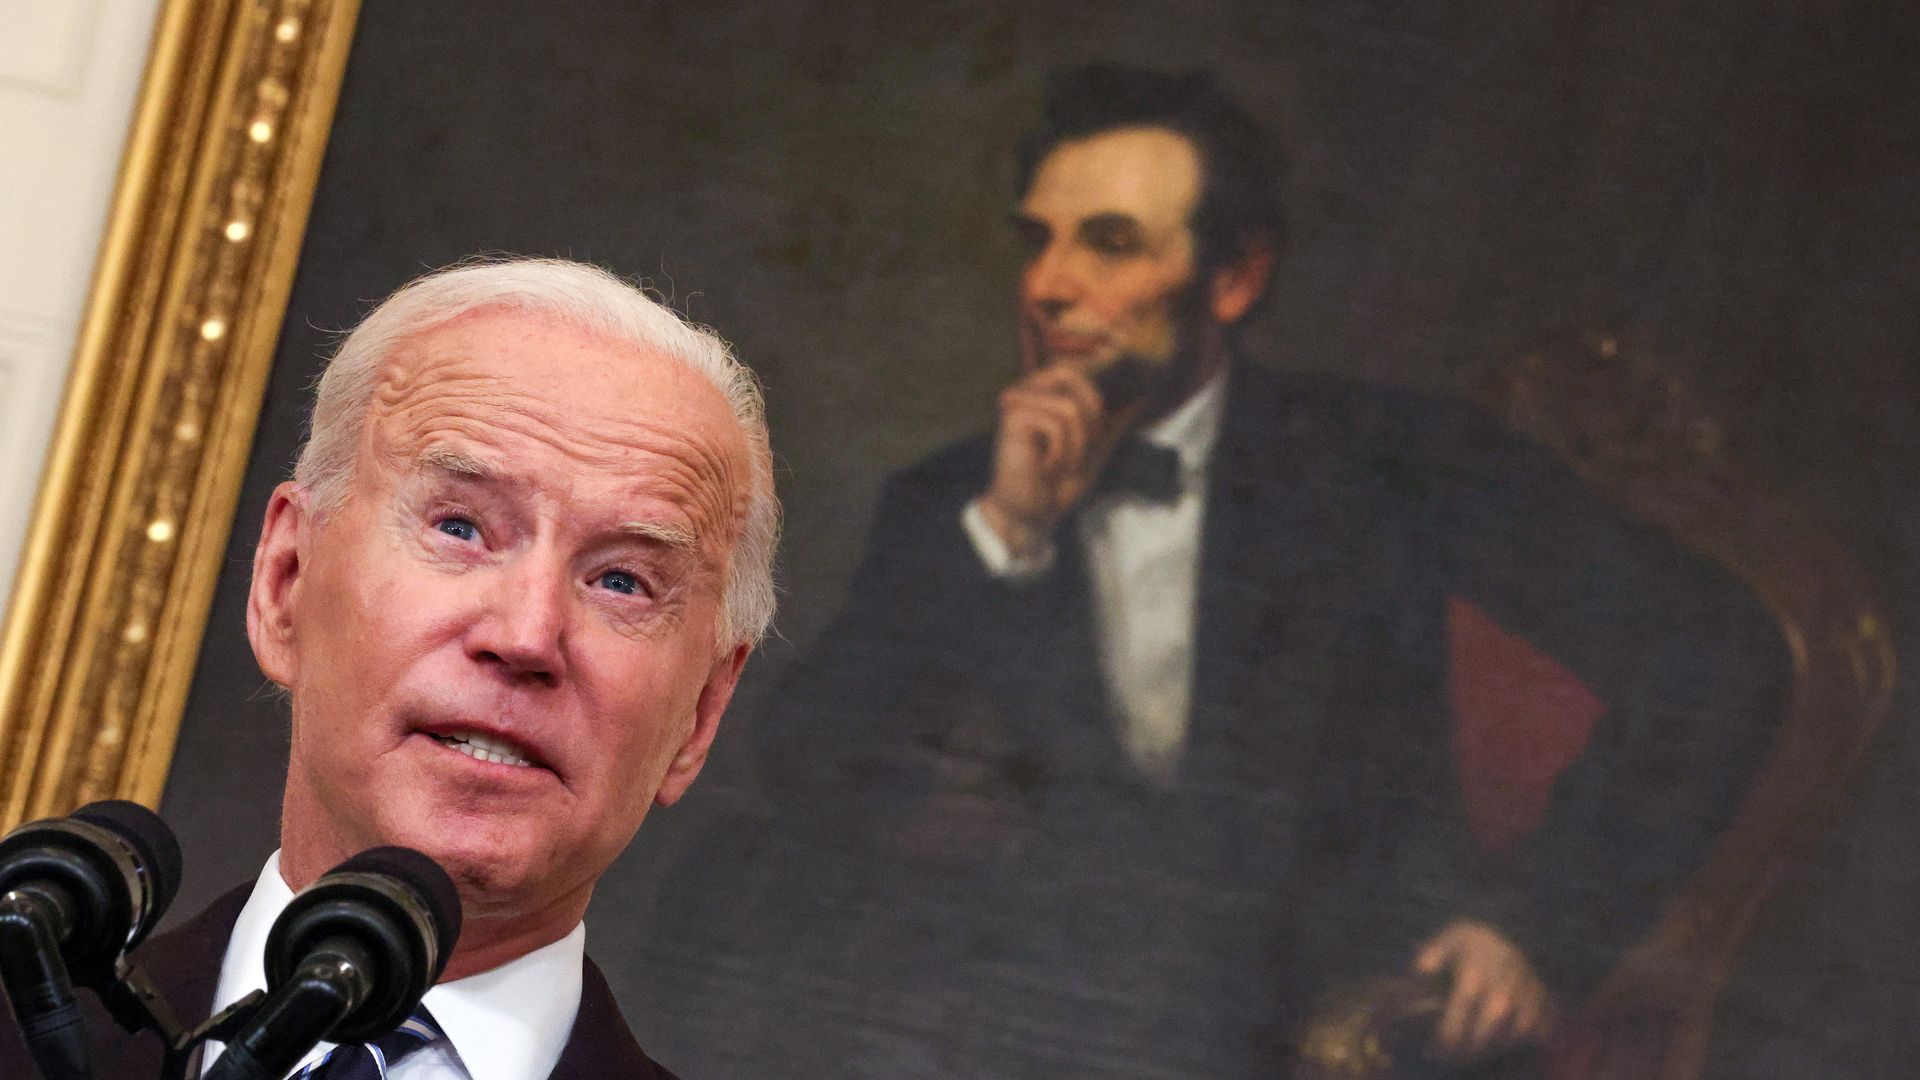 President Biden's face is shown close up, with Abraham Lincoln's portrait in the background